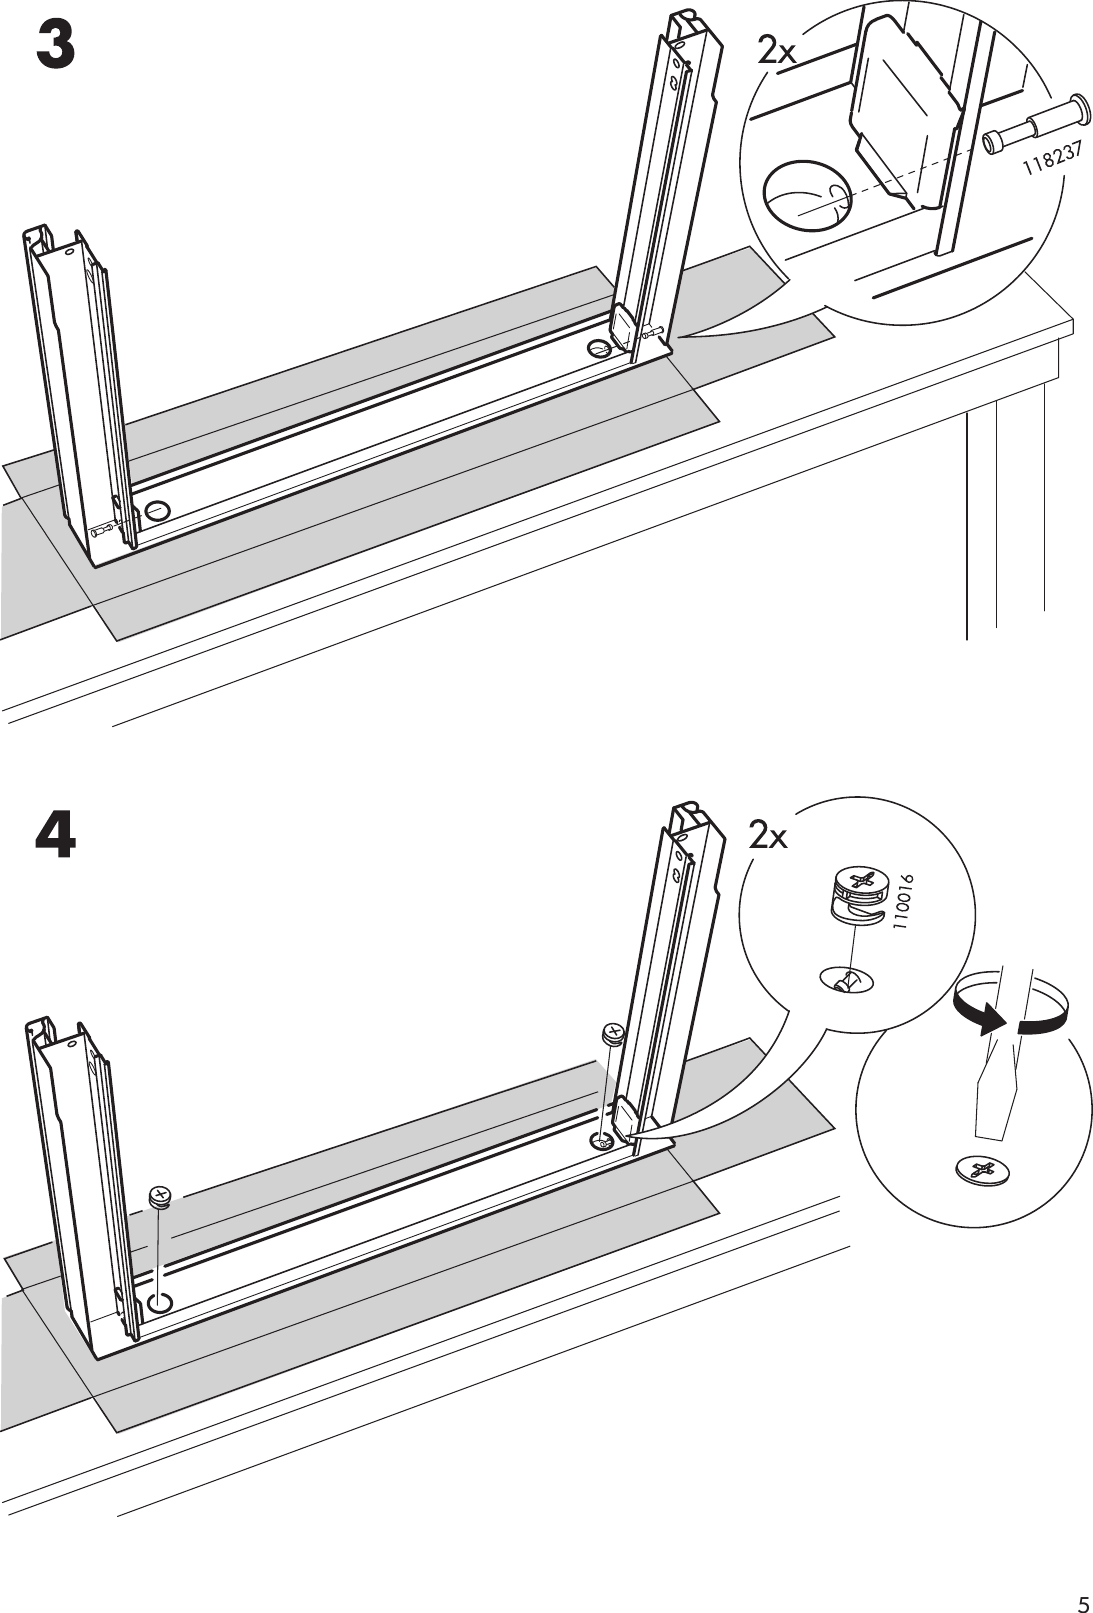 Page 5 of 12 - Ikea Ikea-Inreda-Pull-Out-Frame-Assembly-Instruction